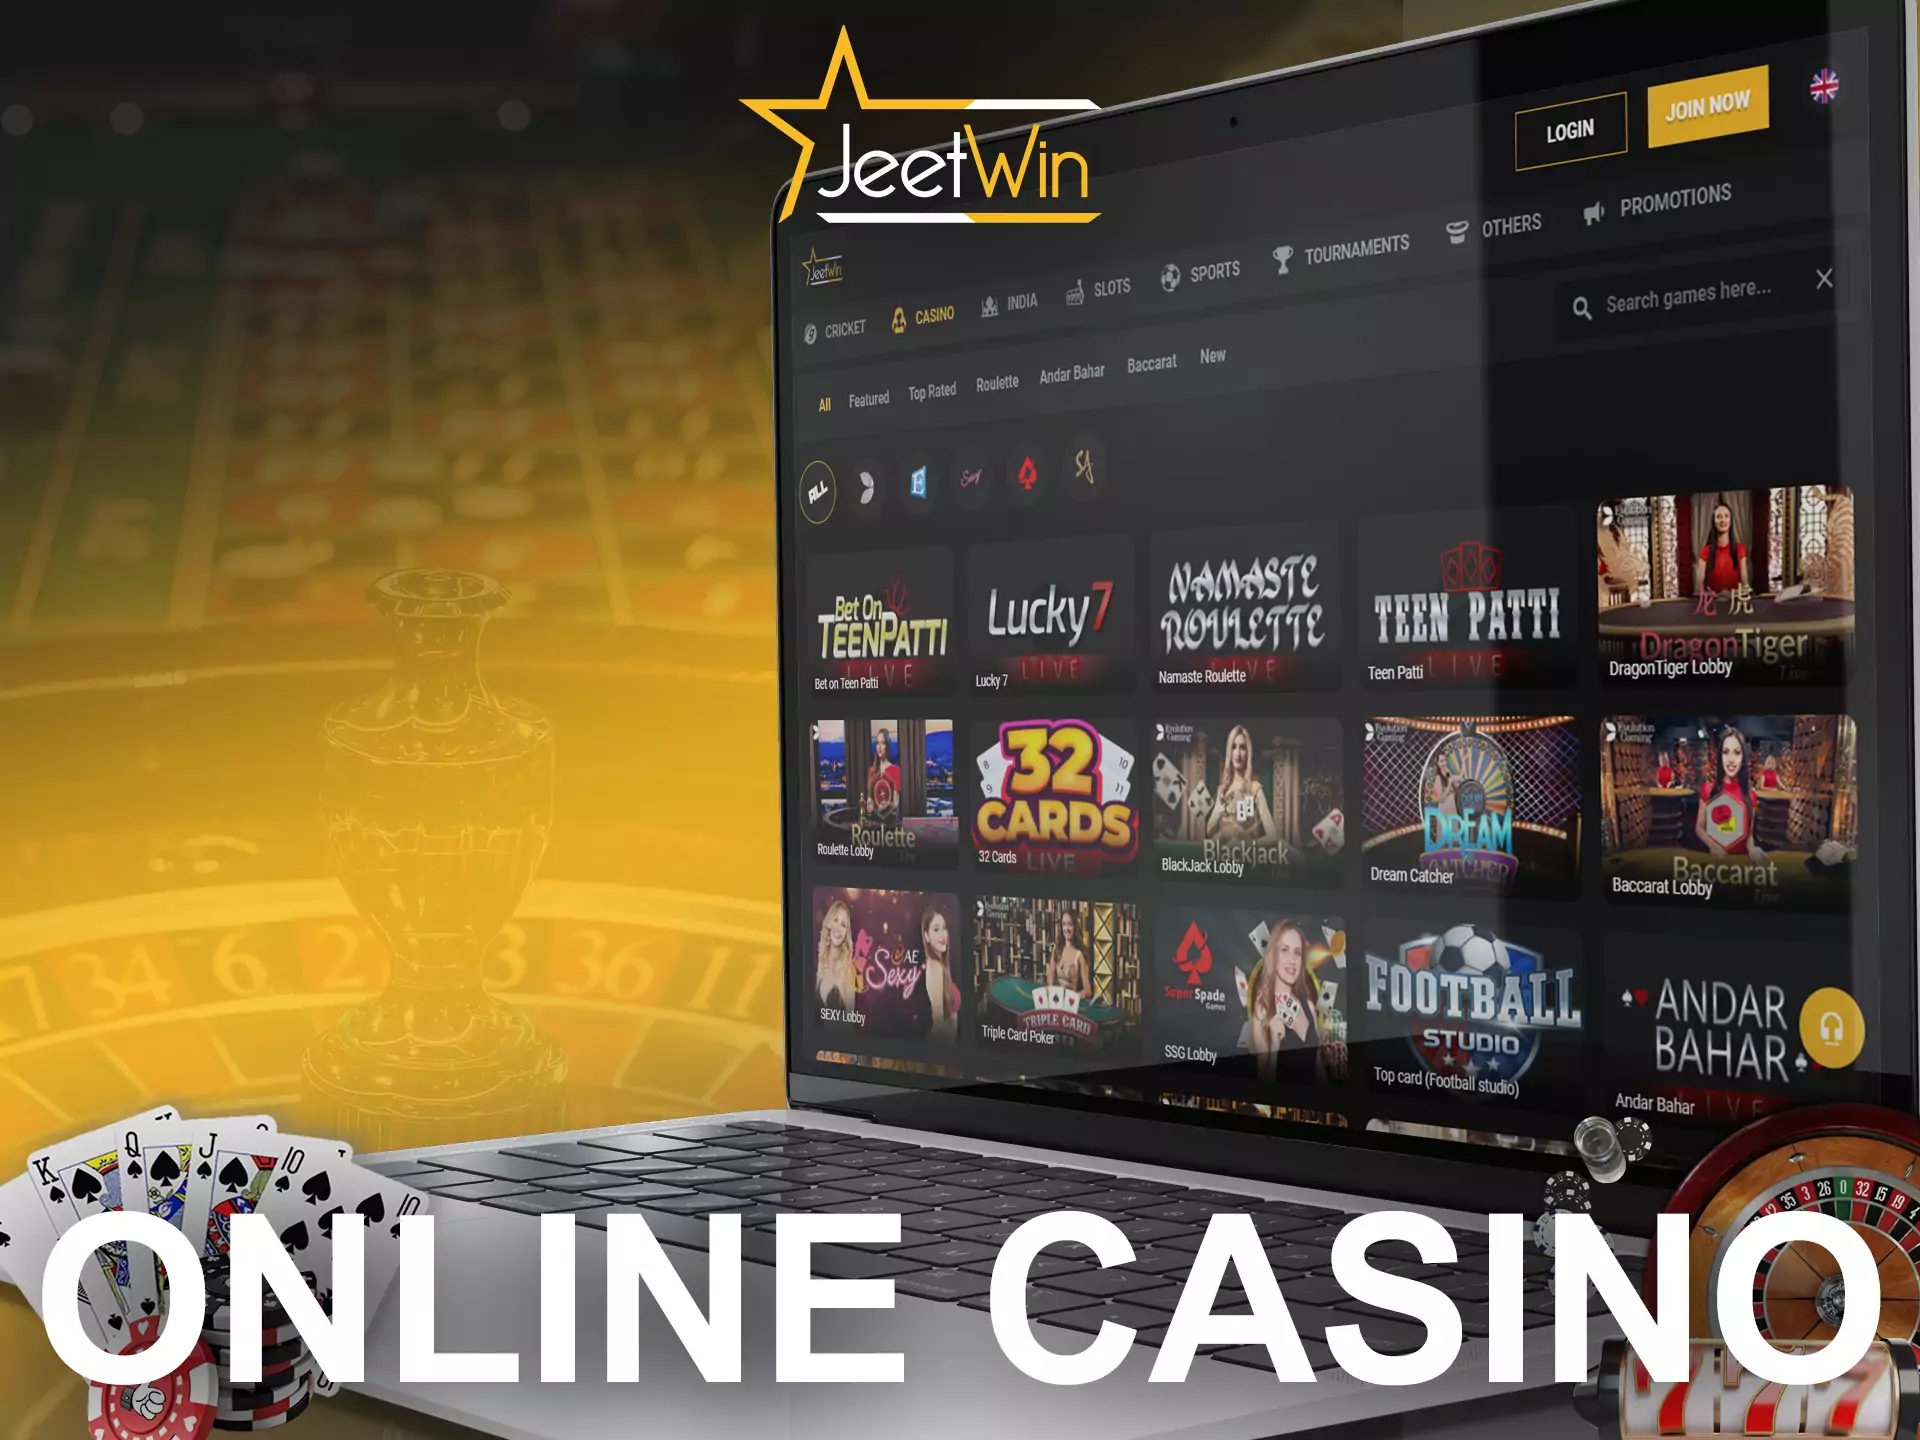 Find your favorite game at JeetWin online casino.